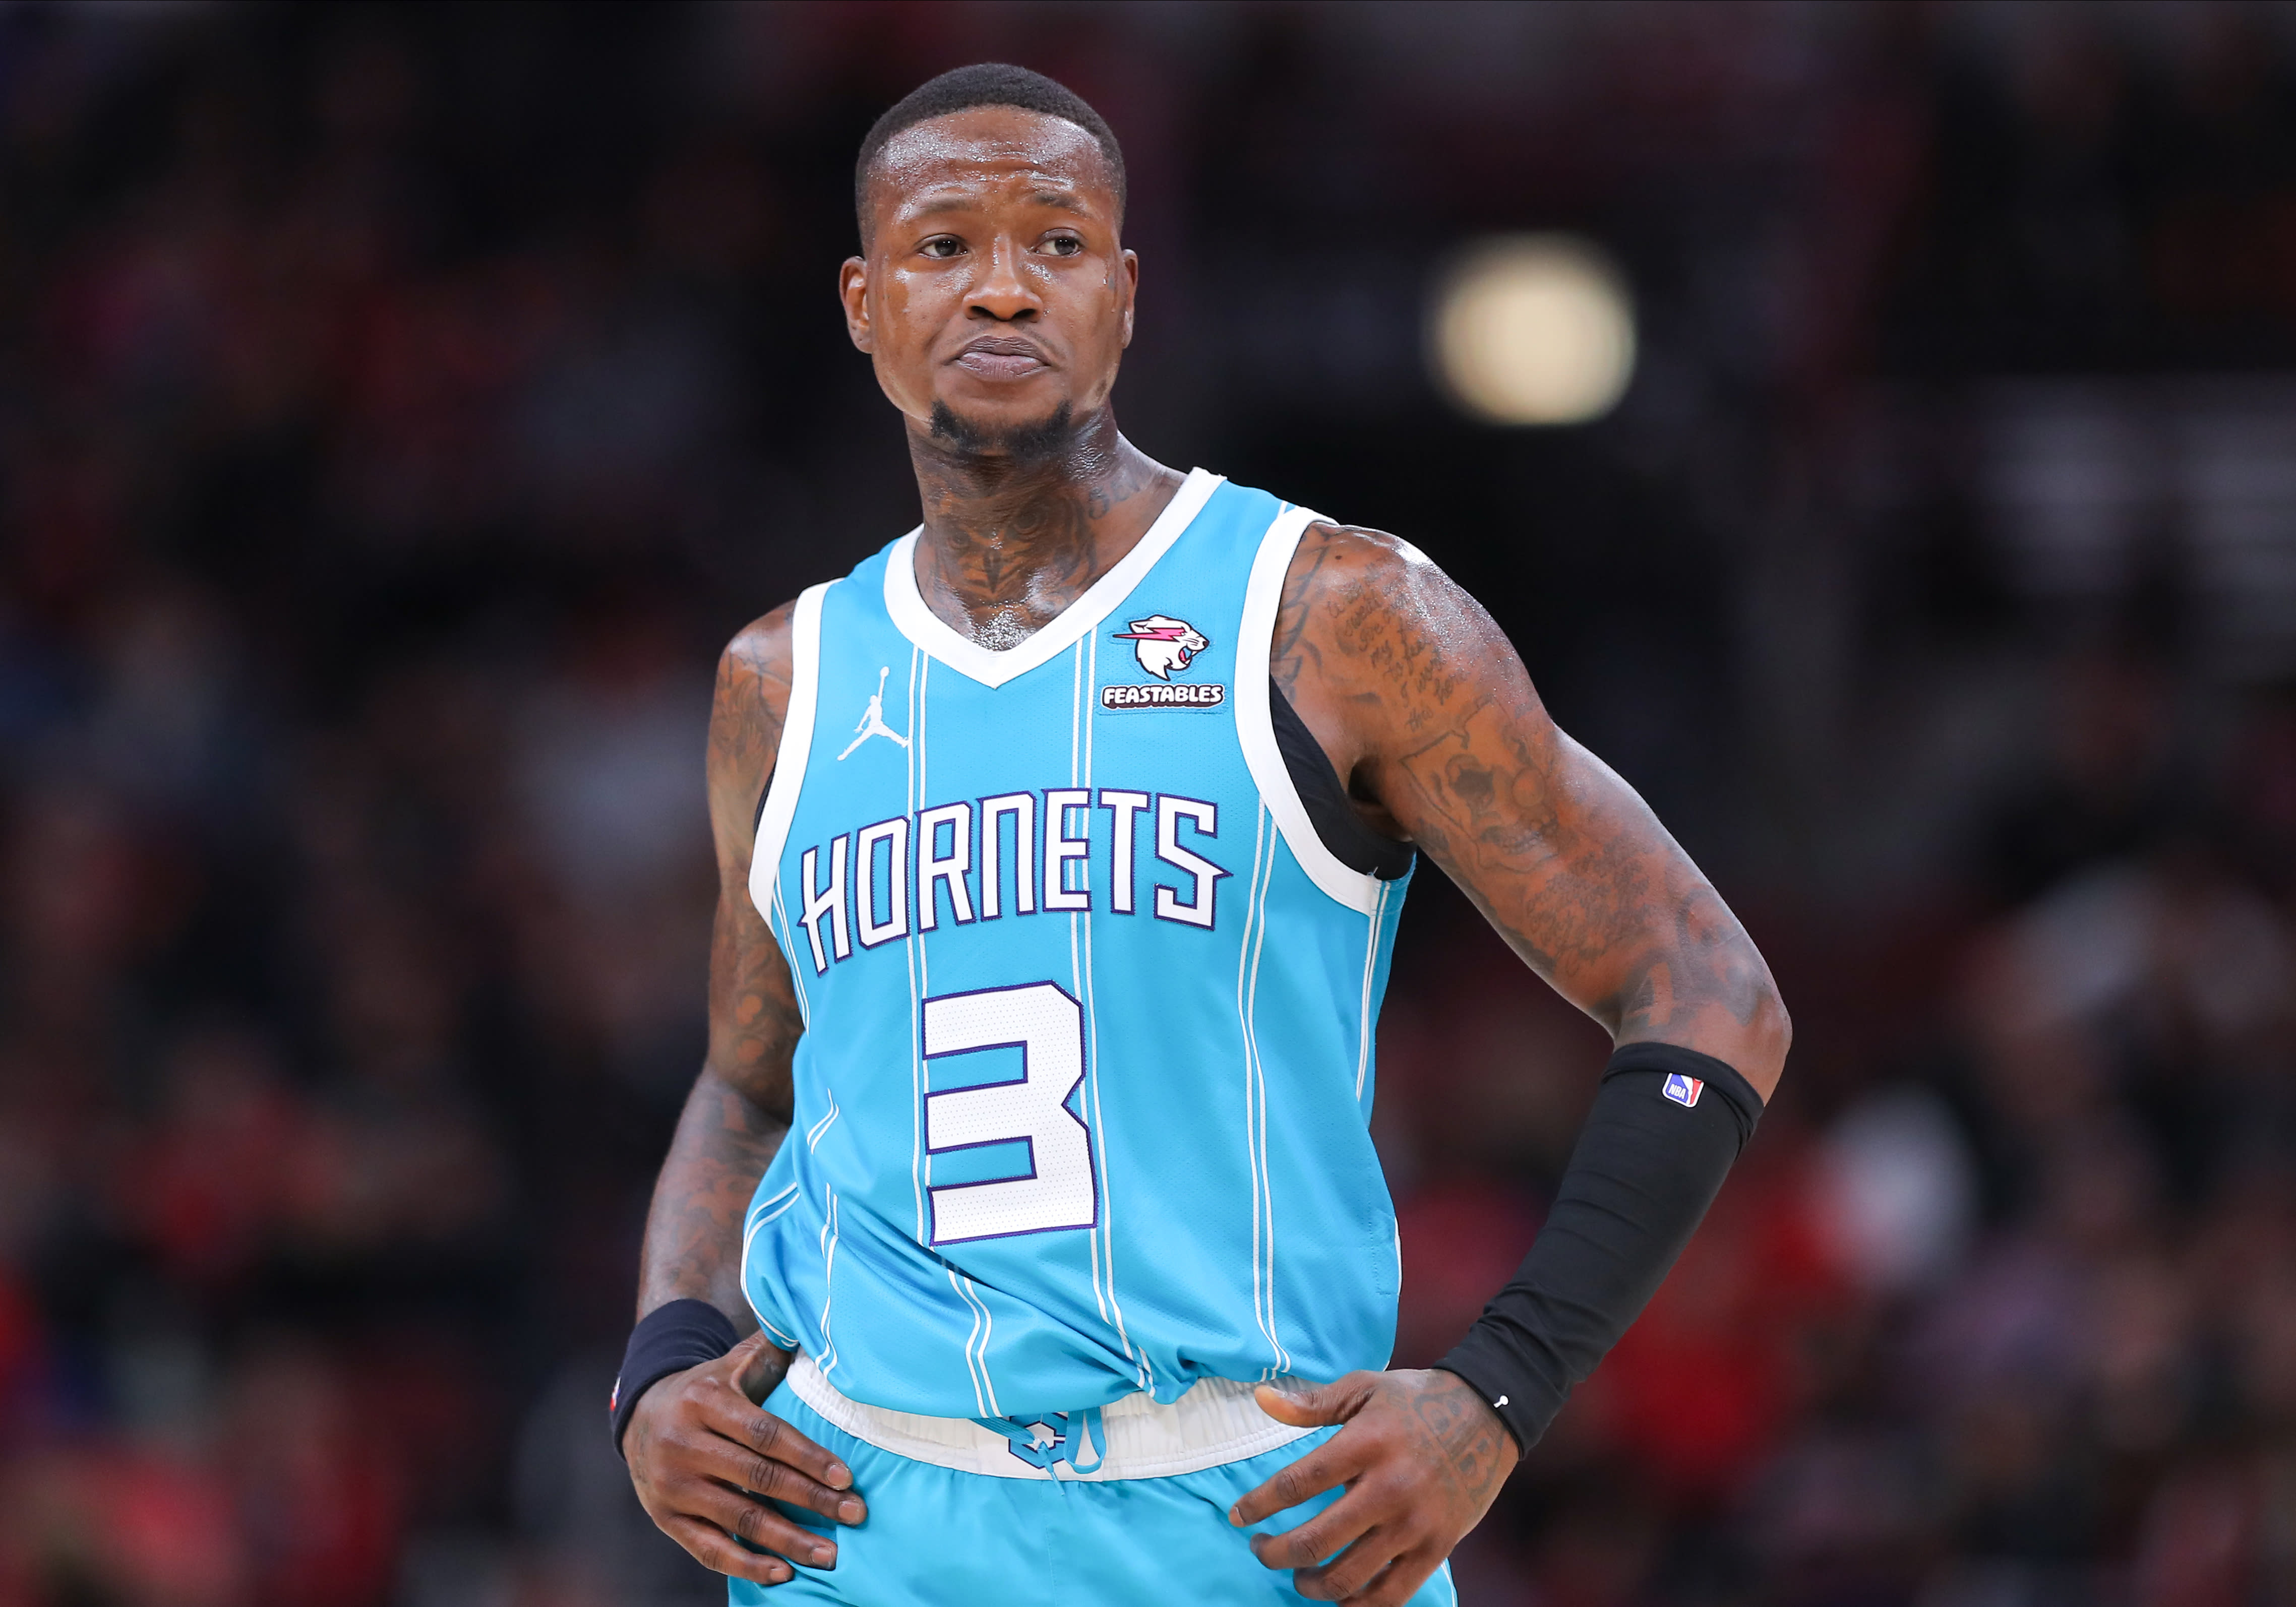 Terry Rozier traded to Heat: Here's all the fantasy basketball fallout